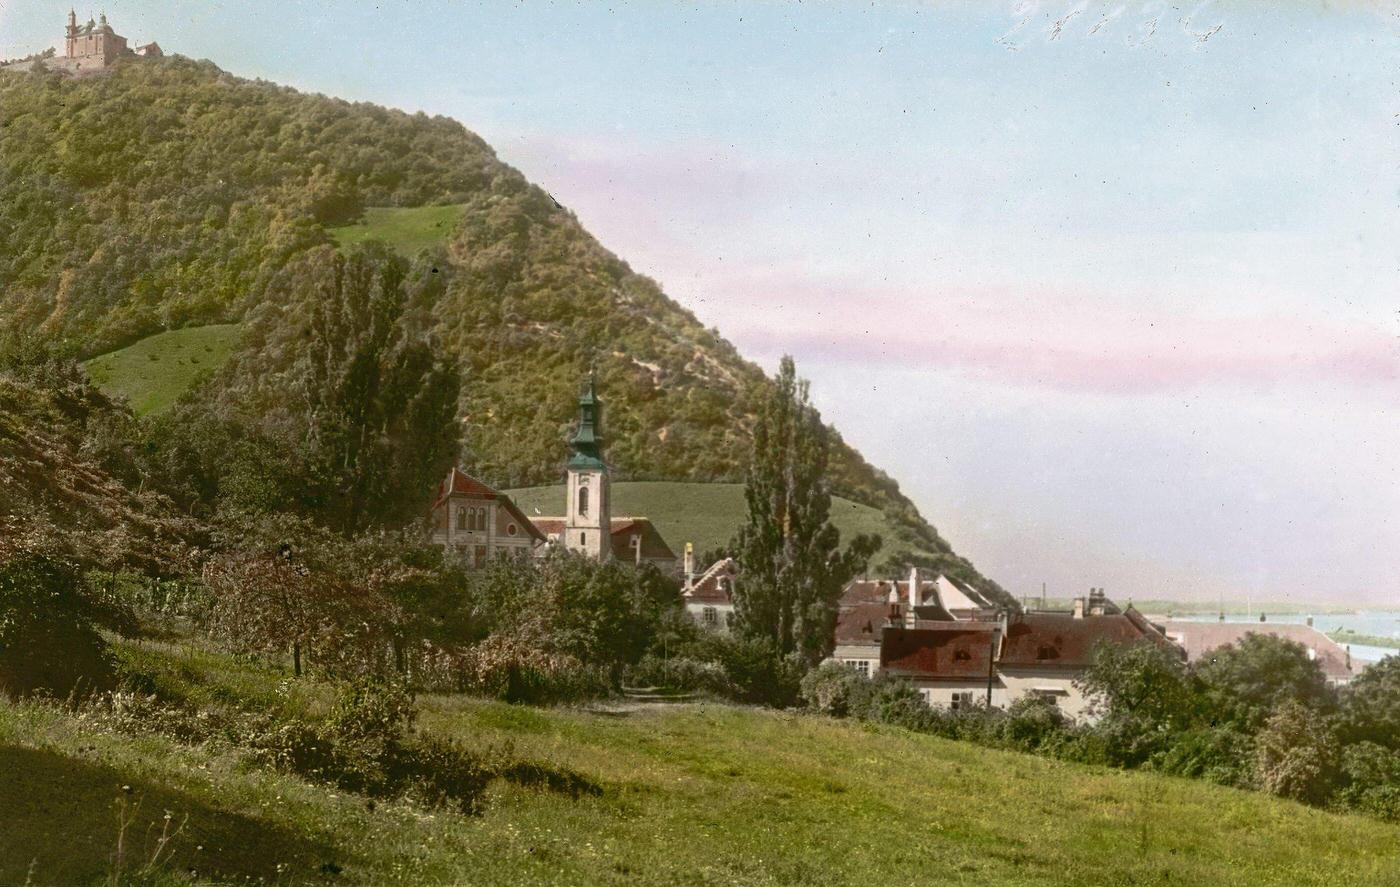 The Kahlenbergerdorf in Vienna with the church on the Leopoldsberg, 1900.